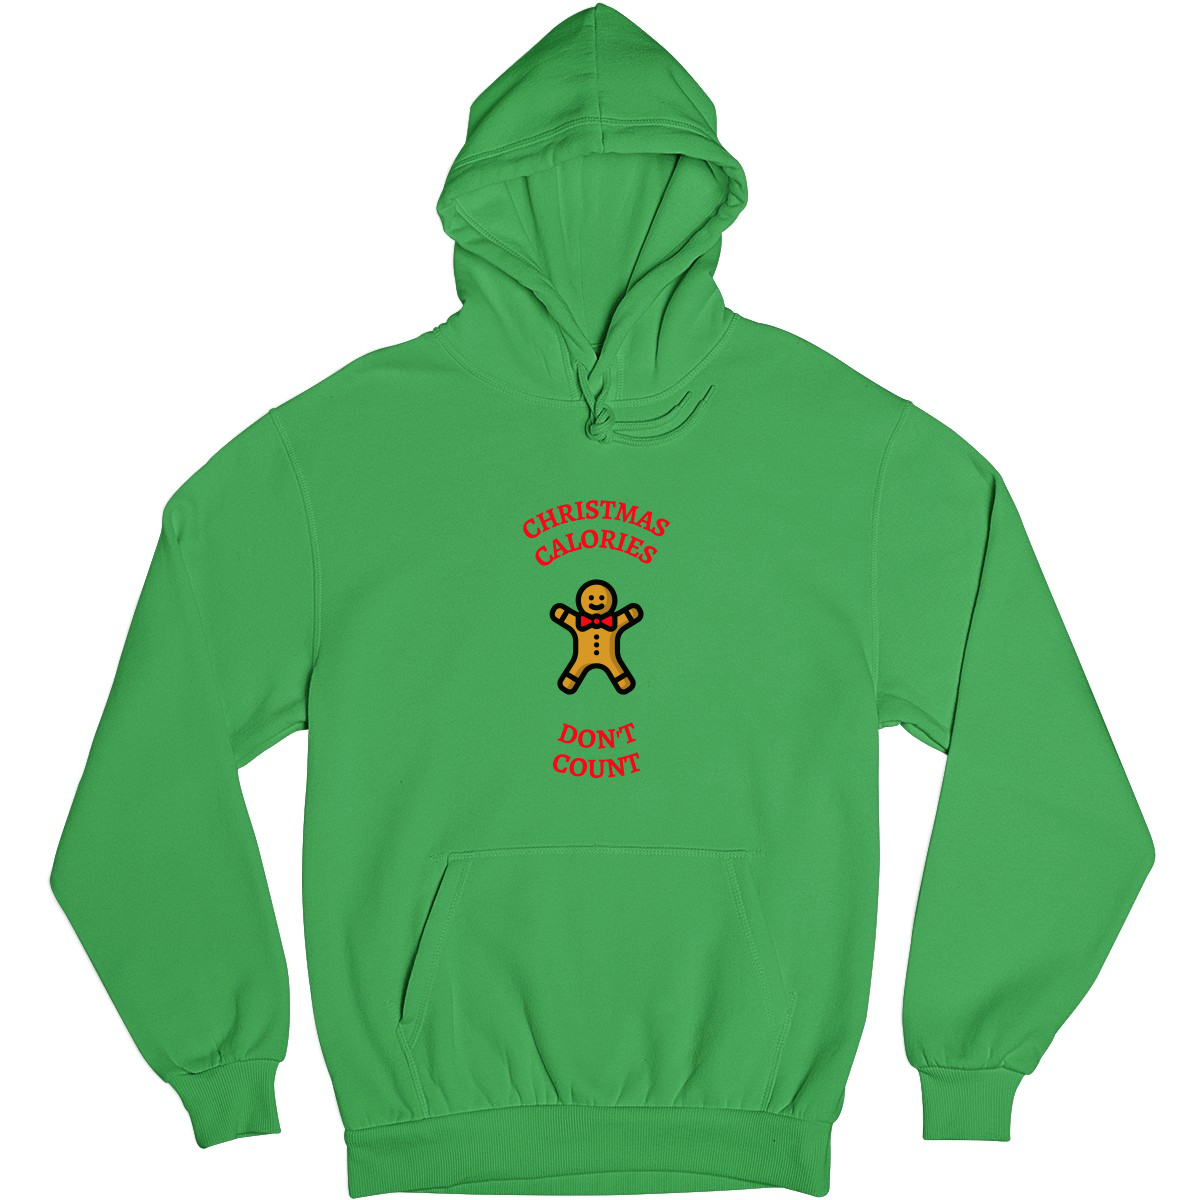 Christmas Calories Don't Count Unisex Hoodie | Green